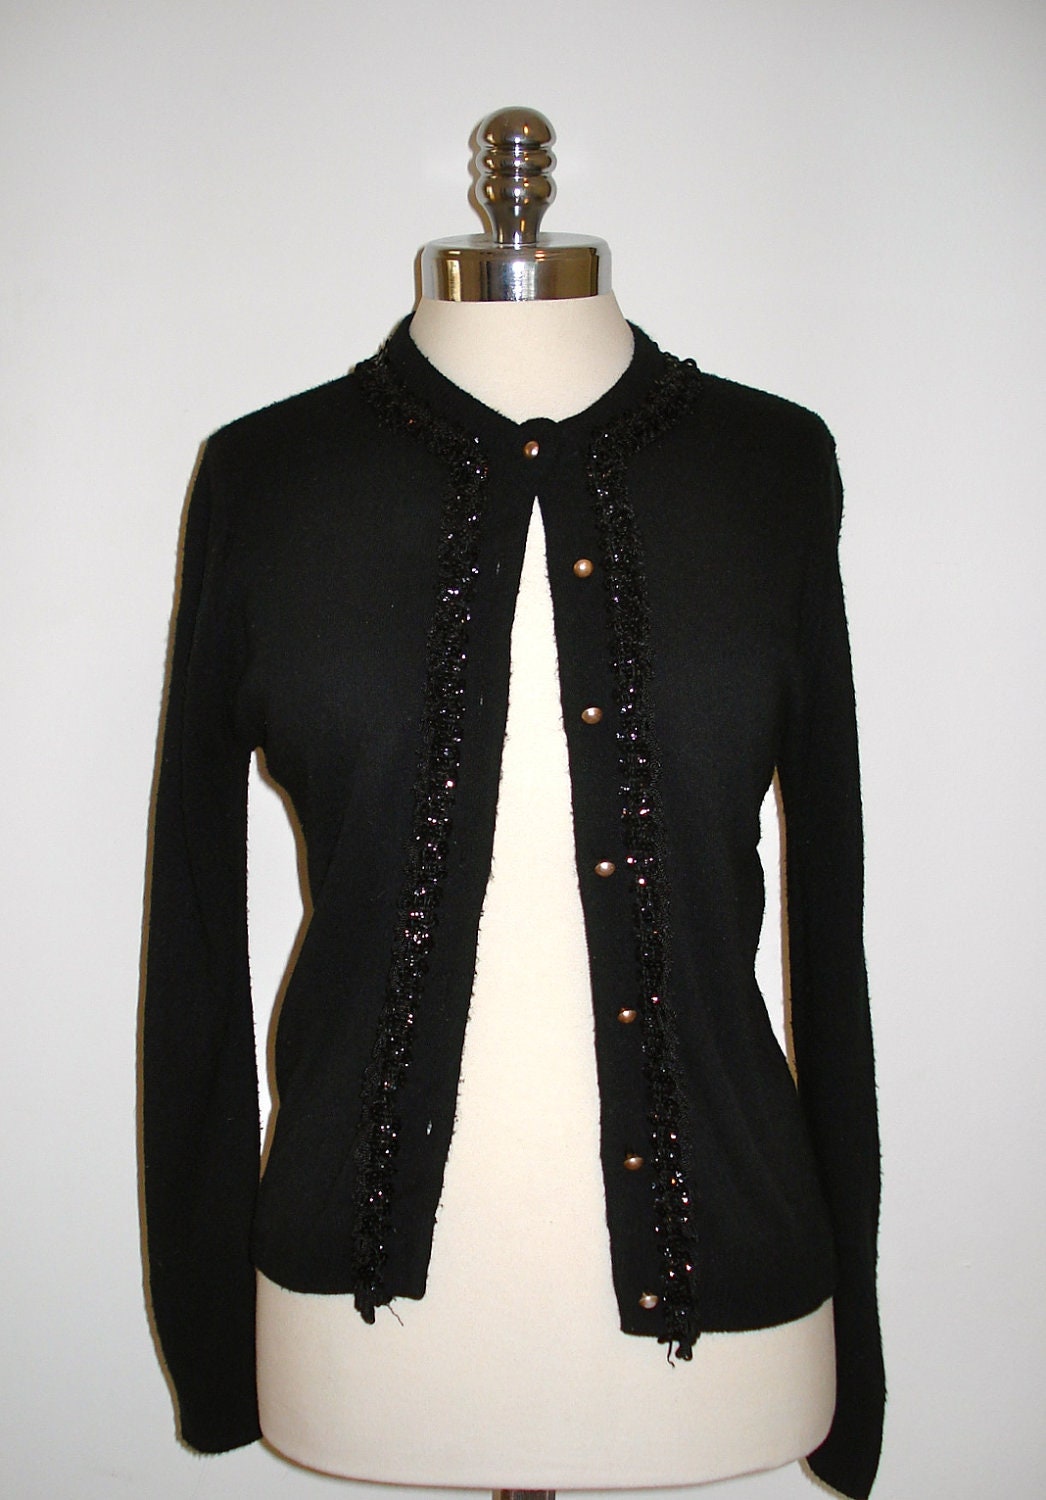 Women's Vintage Black Cardigan Sweater with Sequins